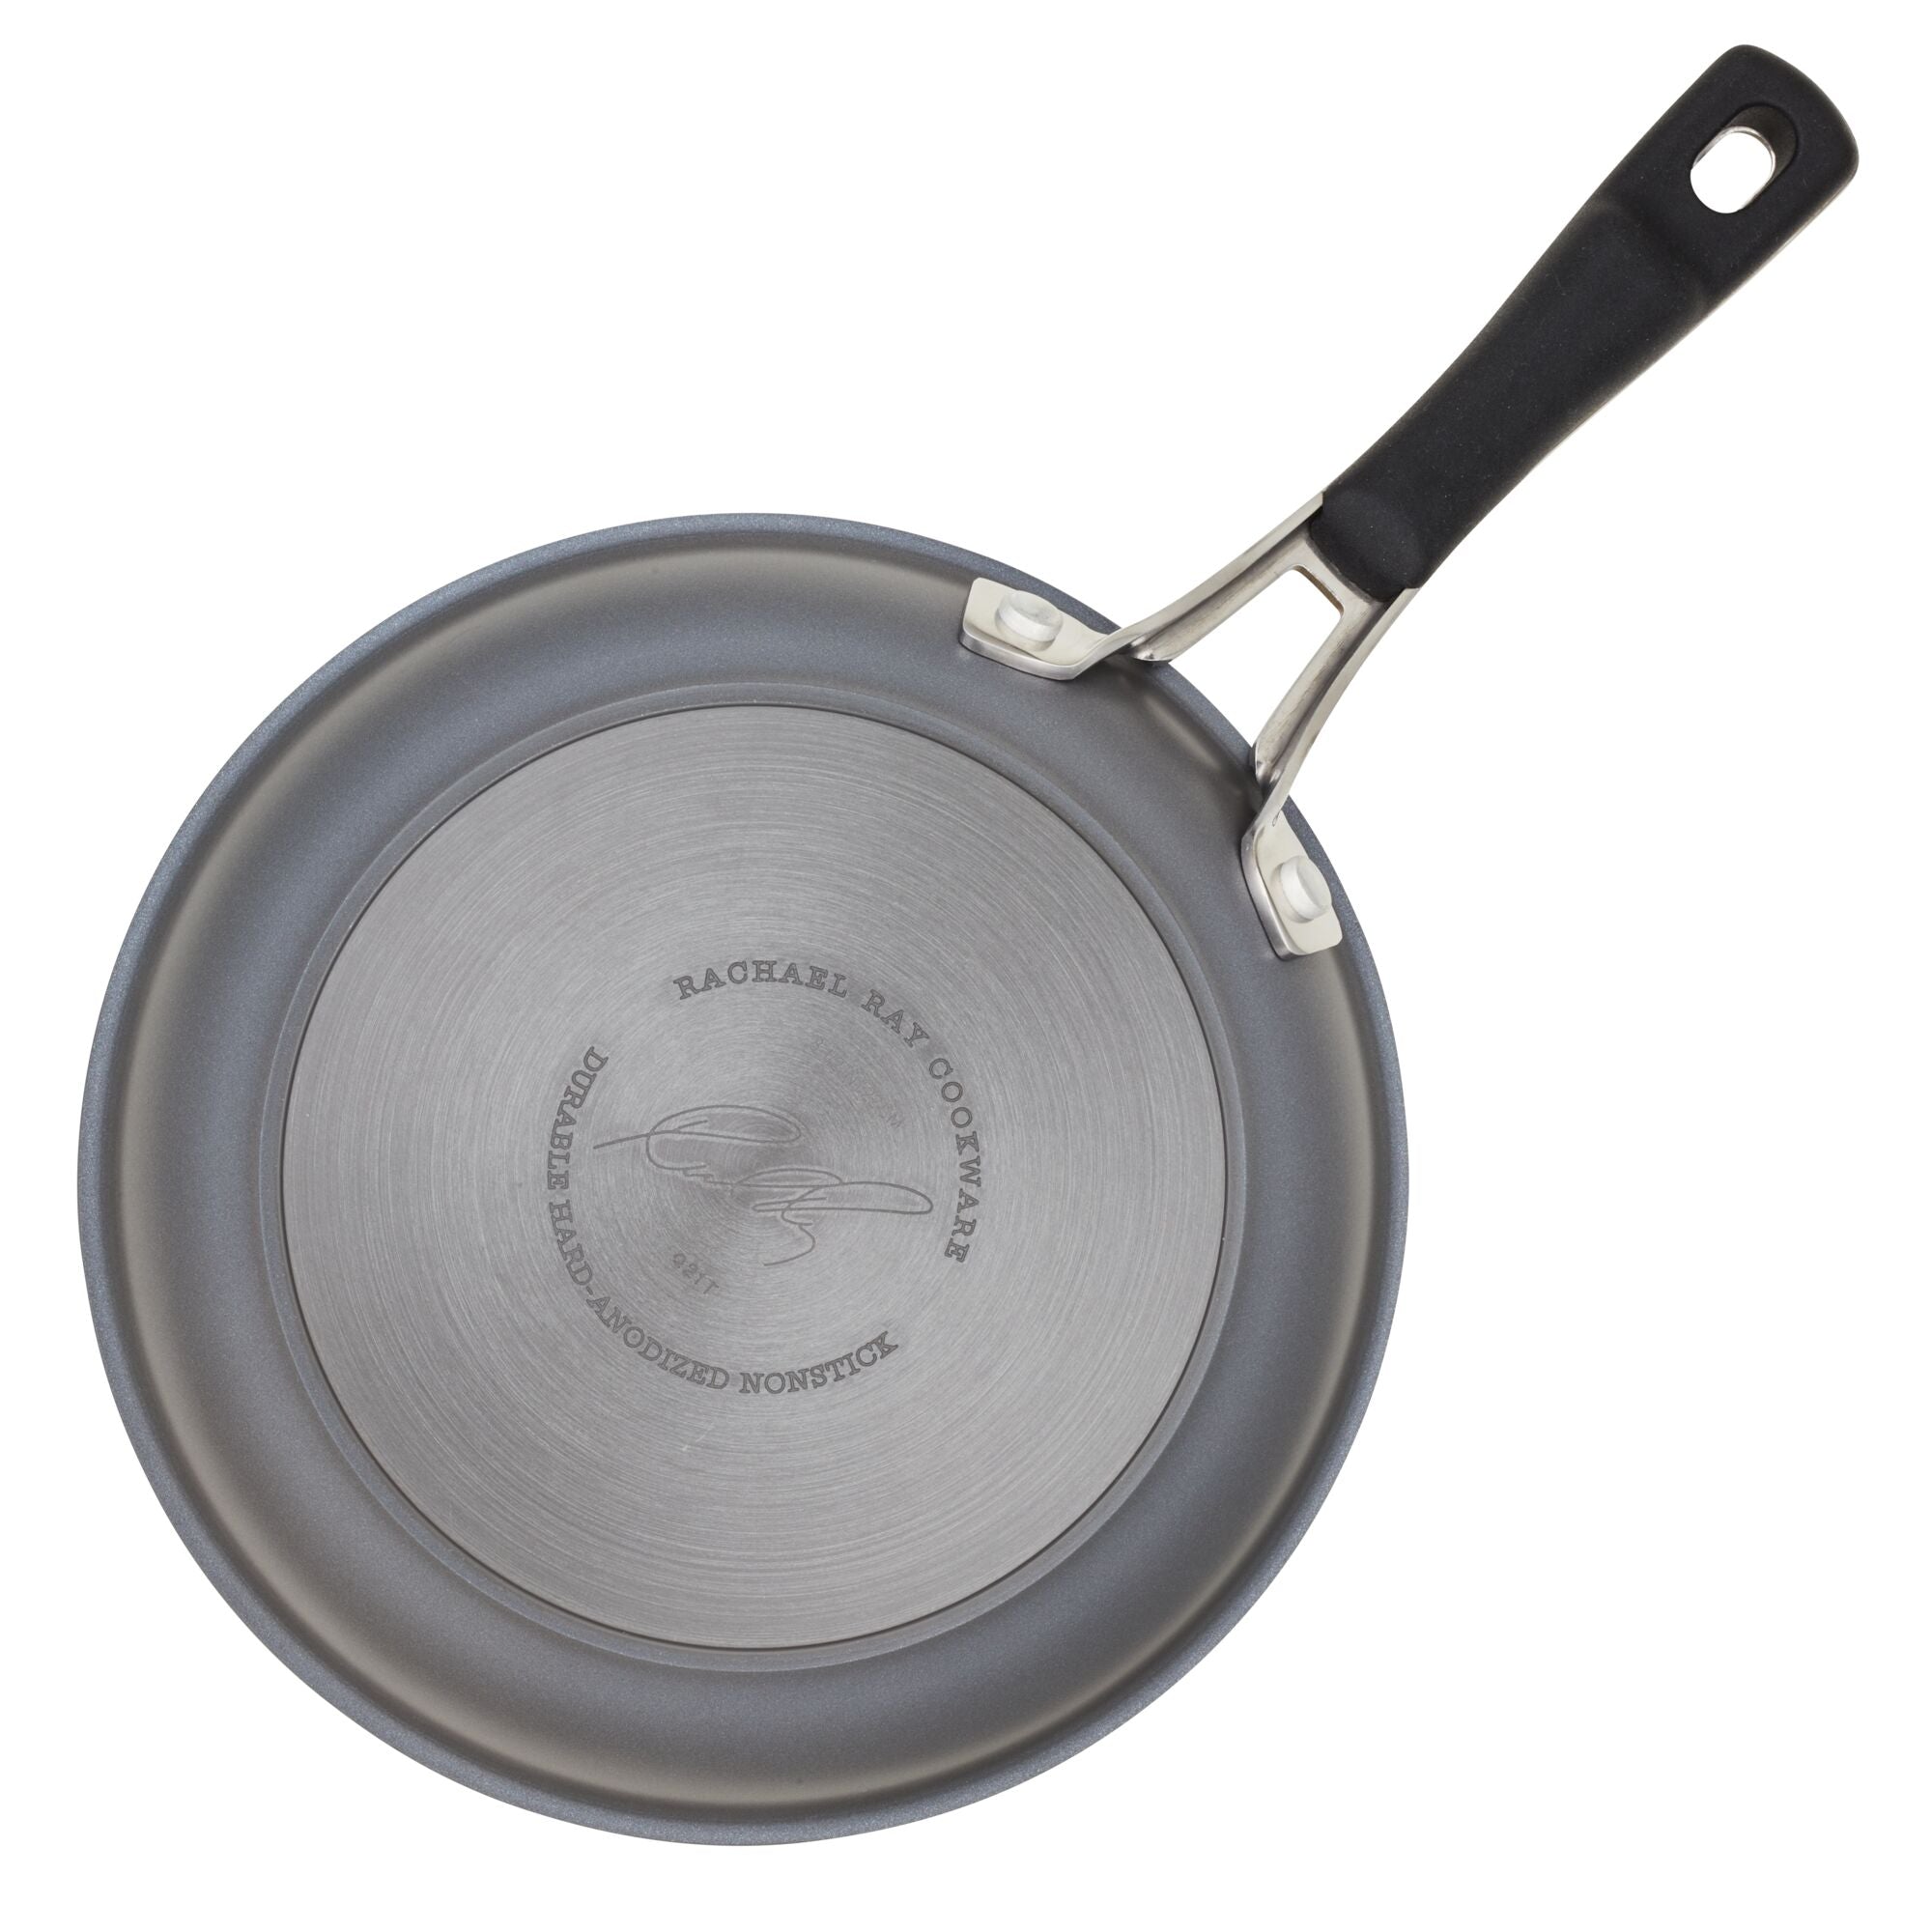 Calphalon Hard-Anodized Nonstick 11-Inch Circle Grill Pan with handle -  household items - by owner - housewares sale 